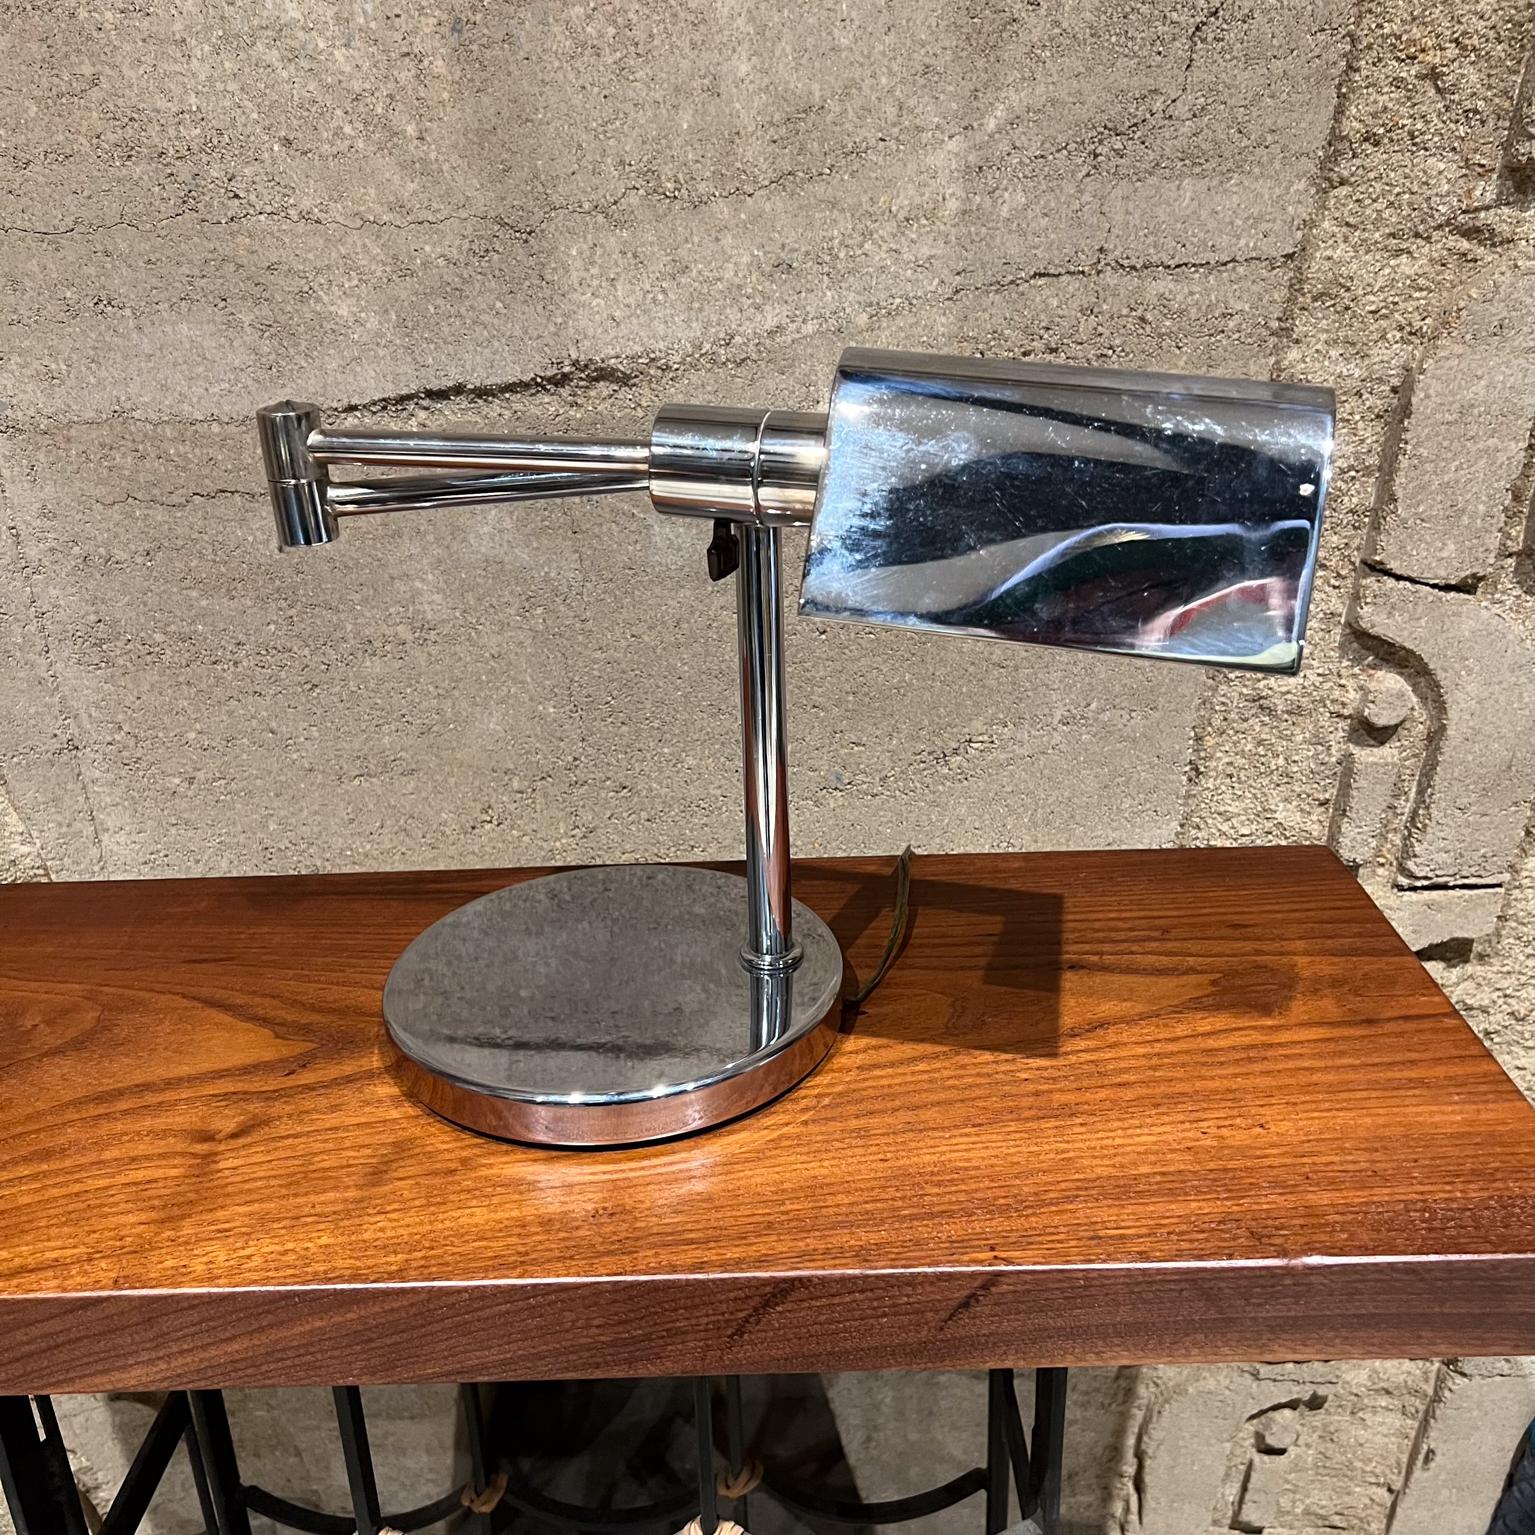 Koch & Lowy Chrome Articulating Swing Arm Desk Lamp
11.13 tall x 14.38 closed x 21 fully extended x 7.88 diameter base
Unmarked
Preowned original vintage condition
Shade has faded areas inside. Chrome is vintage but clean. 
Tested and working.
Refer